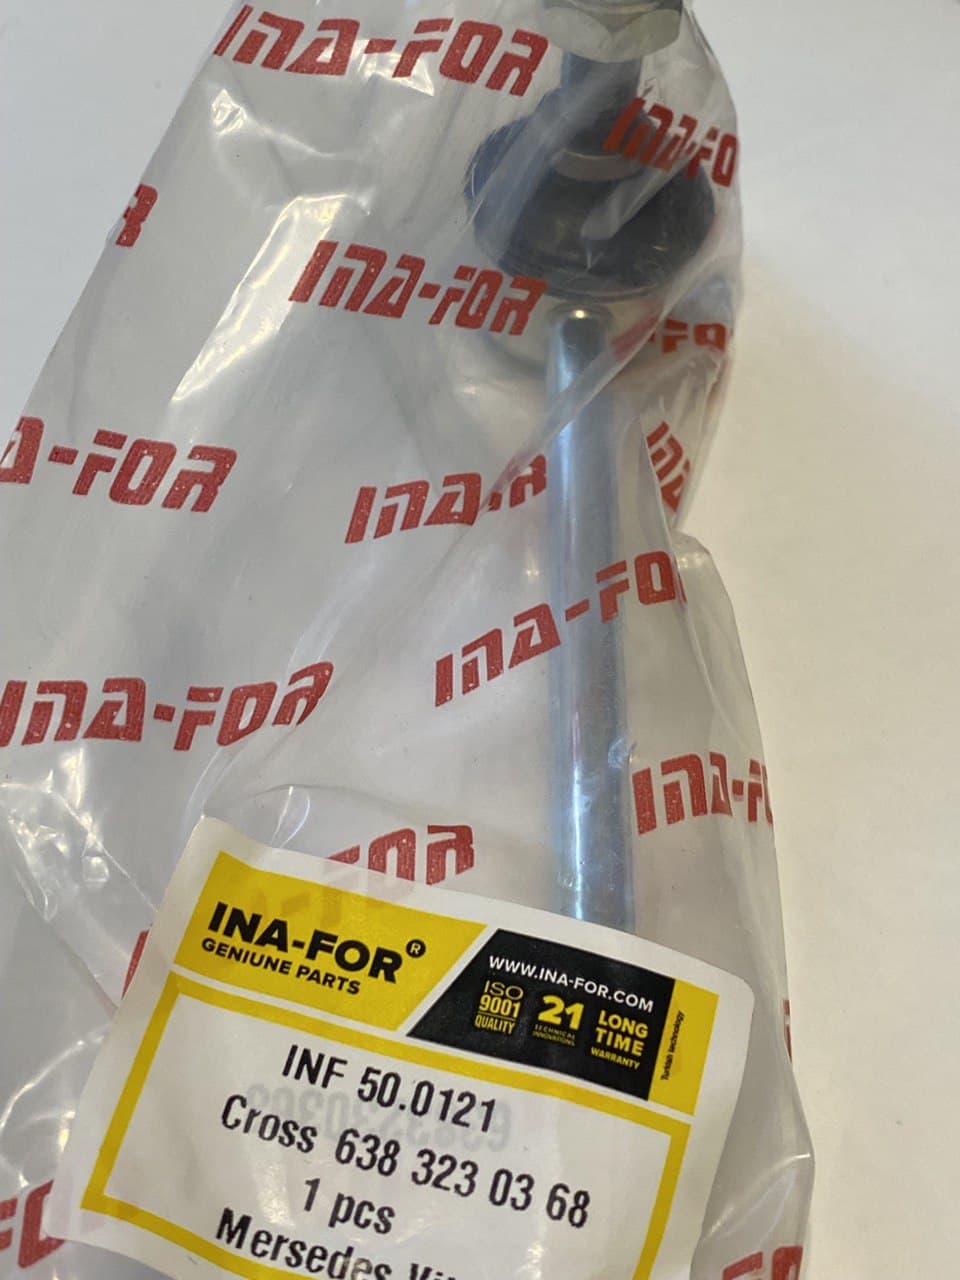   INA-FOR